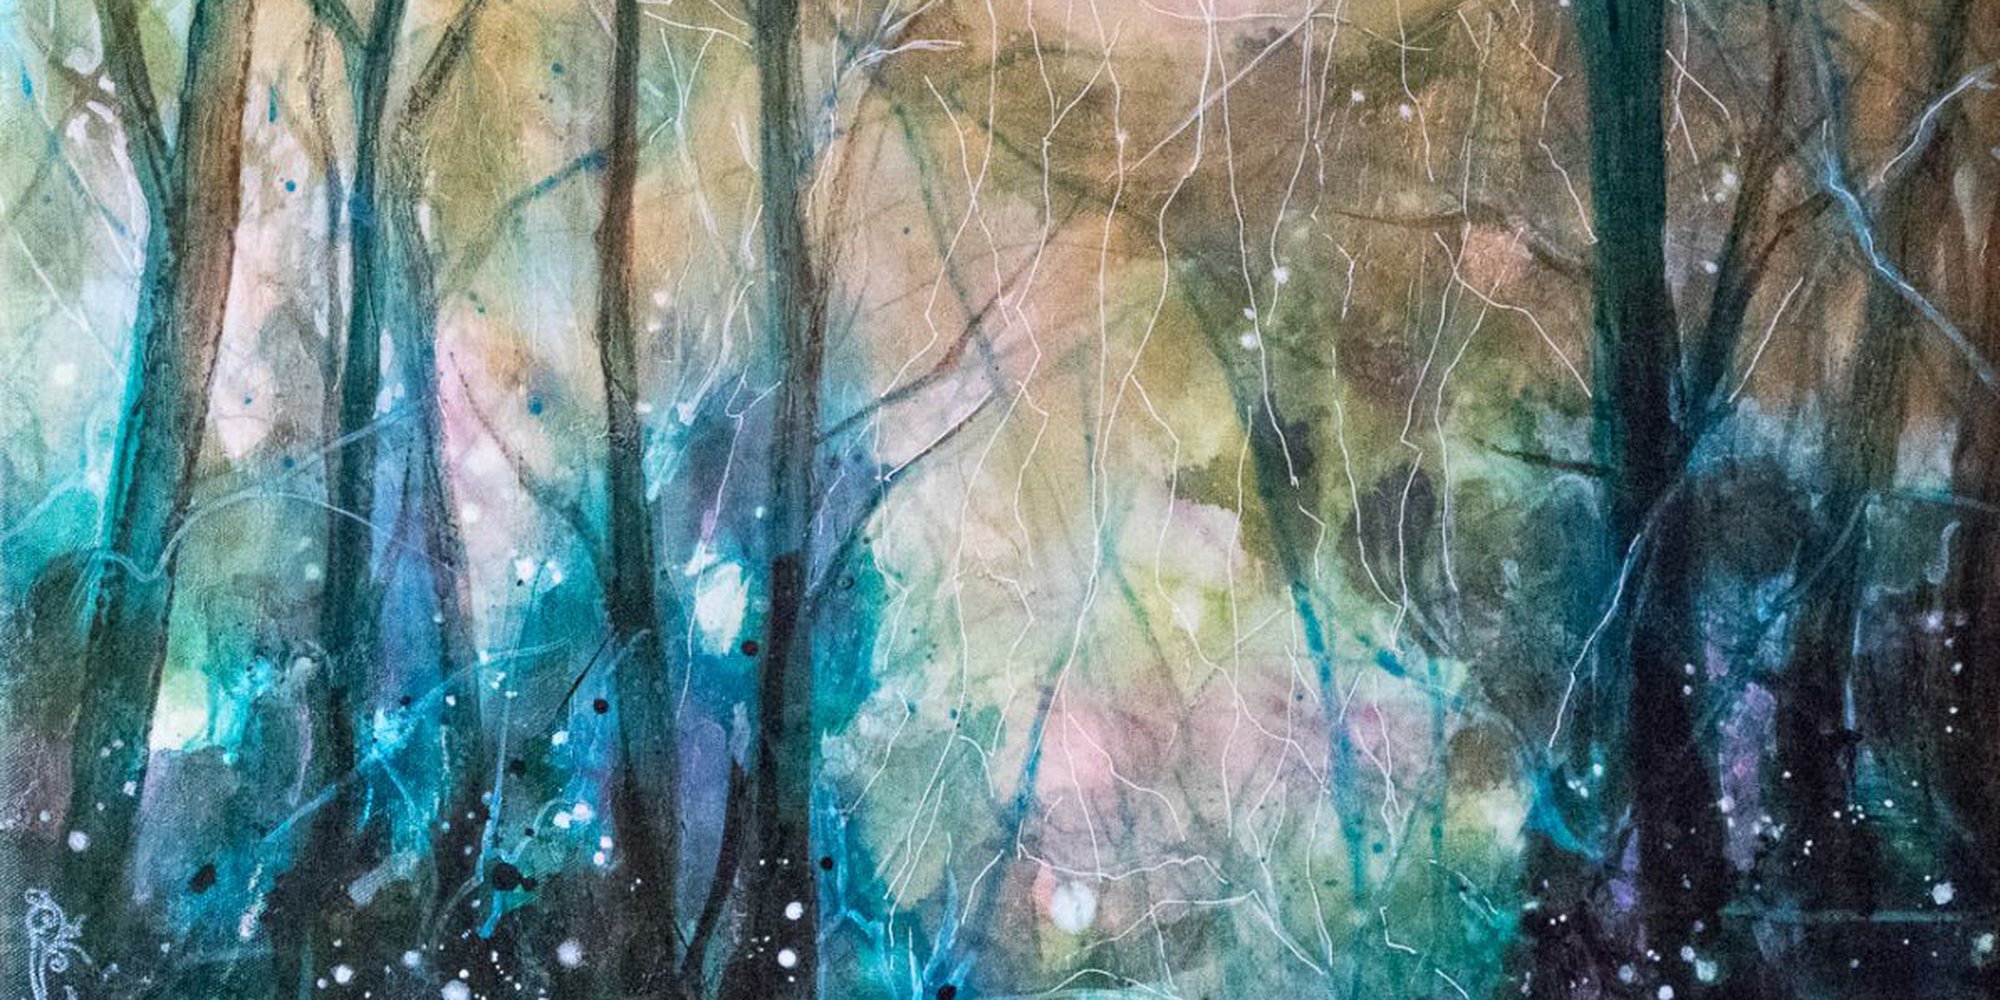 Art of the Day: "Enchanting Forest, mixed media on canvas, 60x60 cm, 2017" by Fabienne Monestier